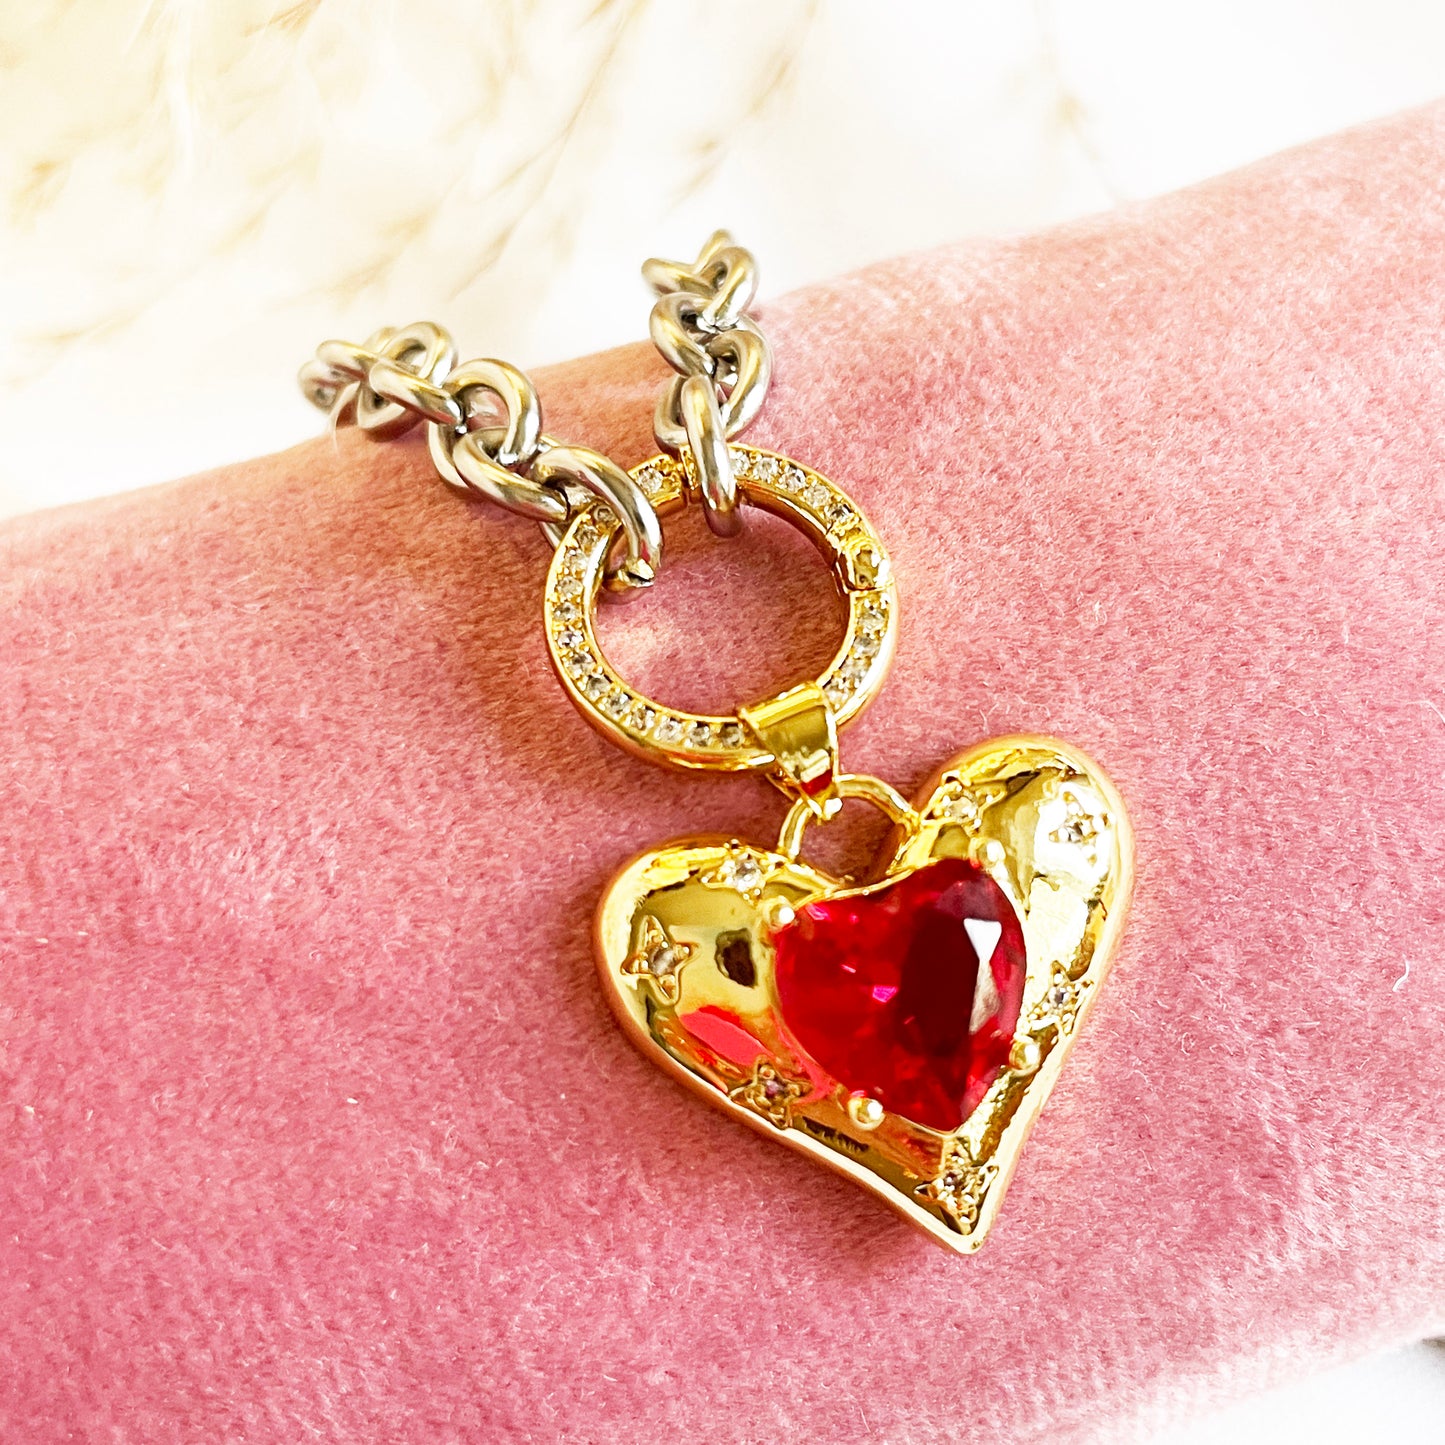 Red Heart Necklace | Mon Amour Mixed Metal